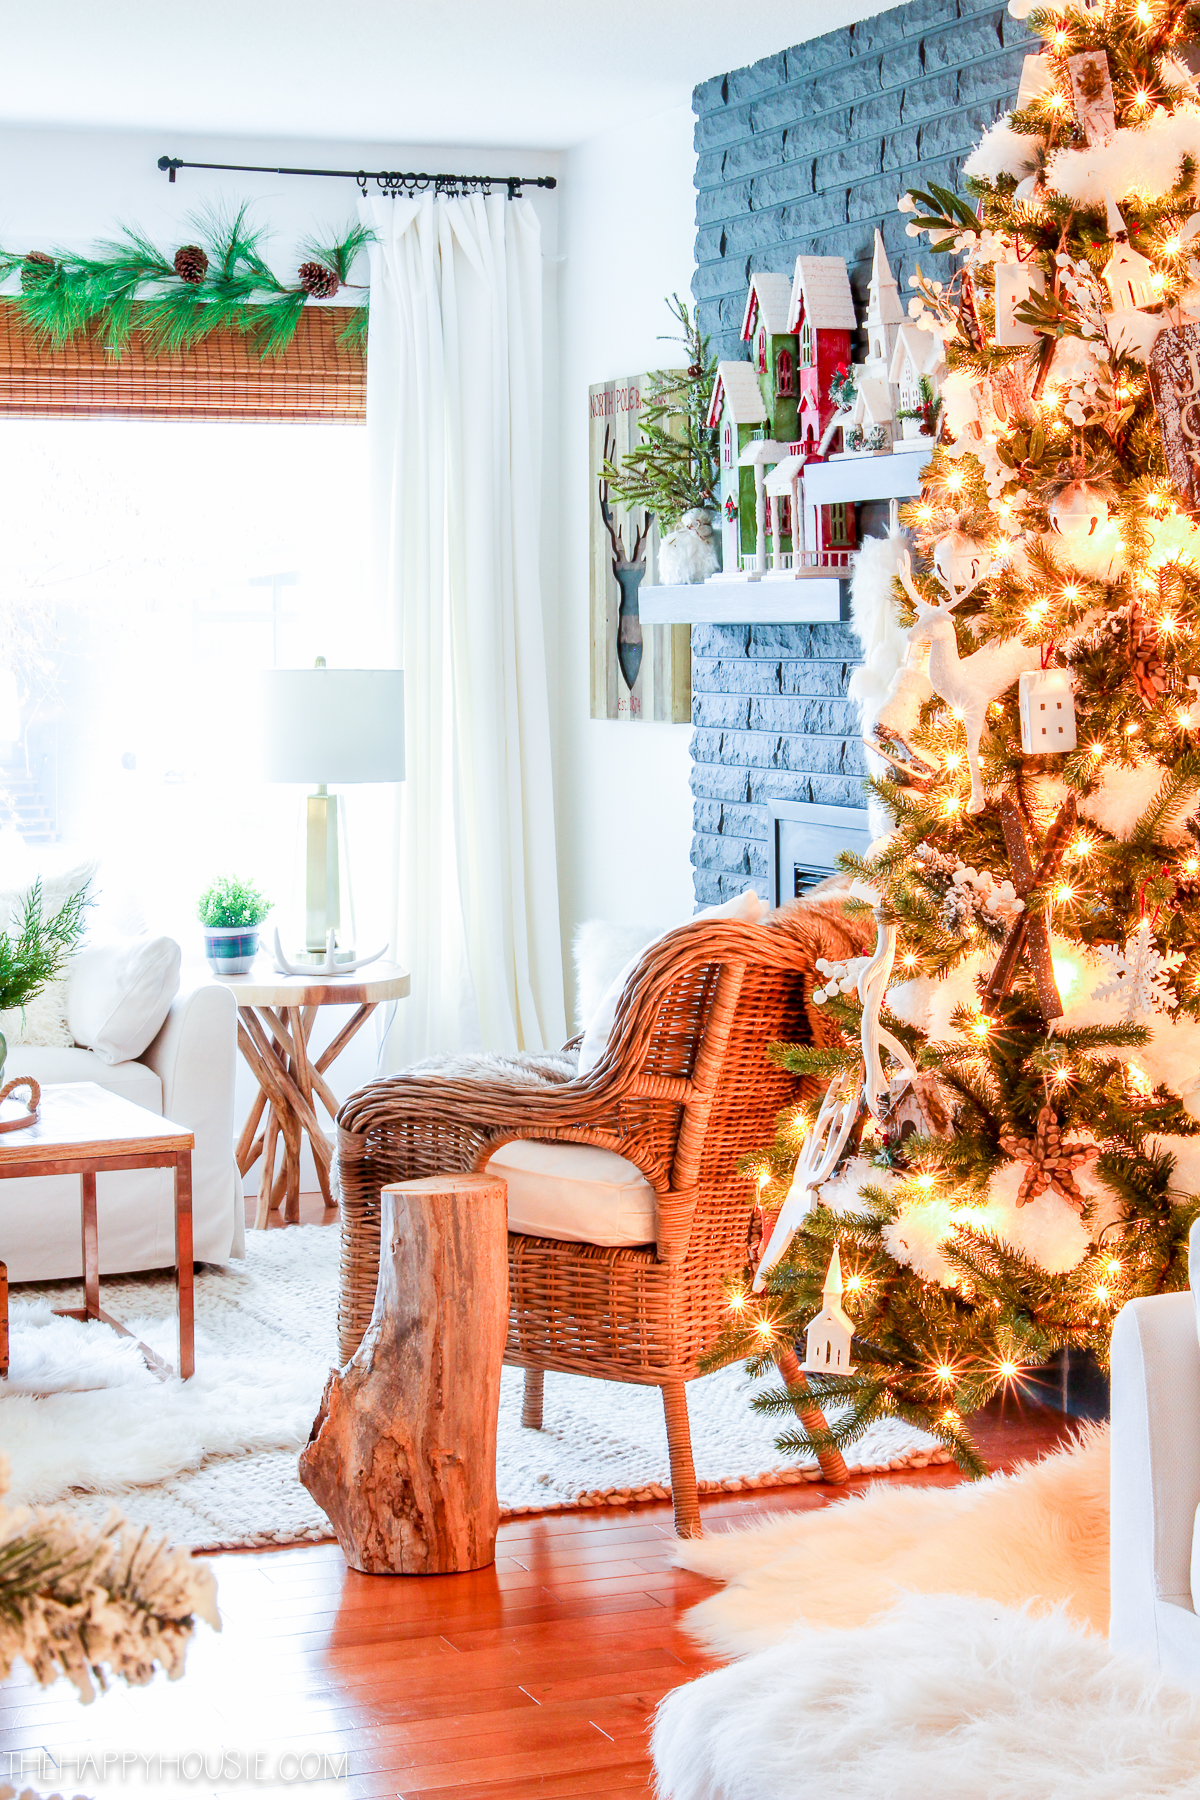 Simple Christmas Decorating throughout the House